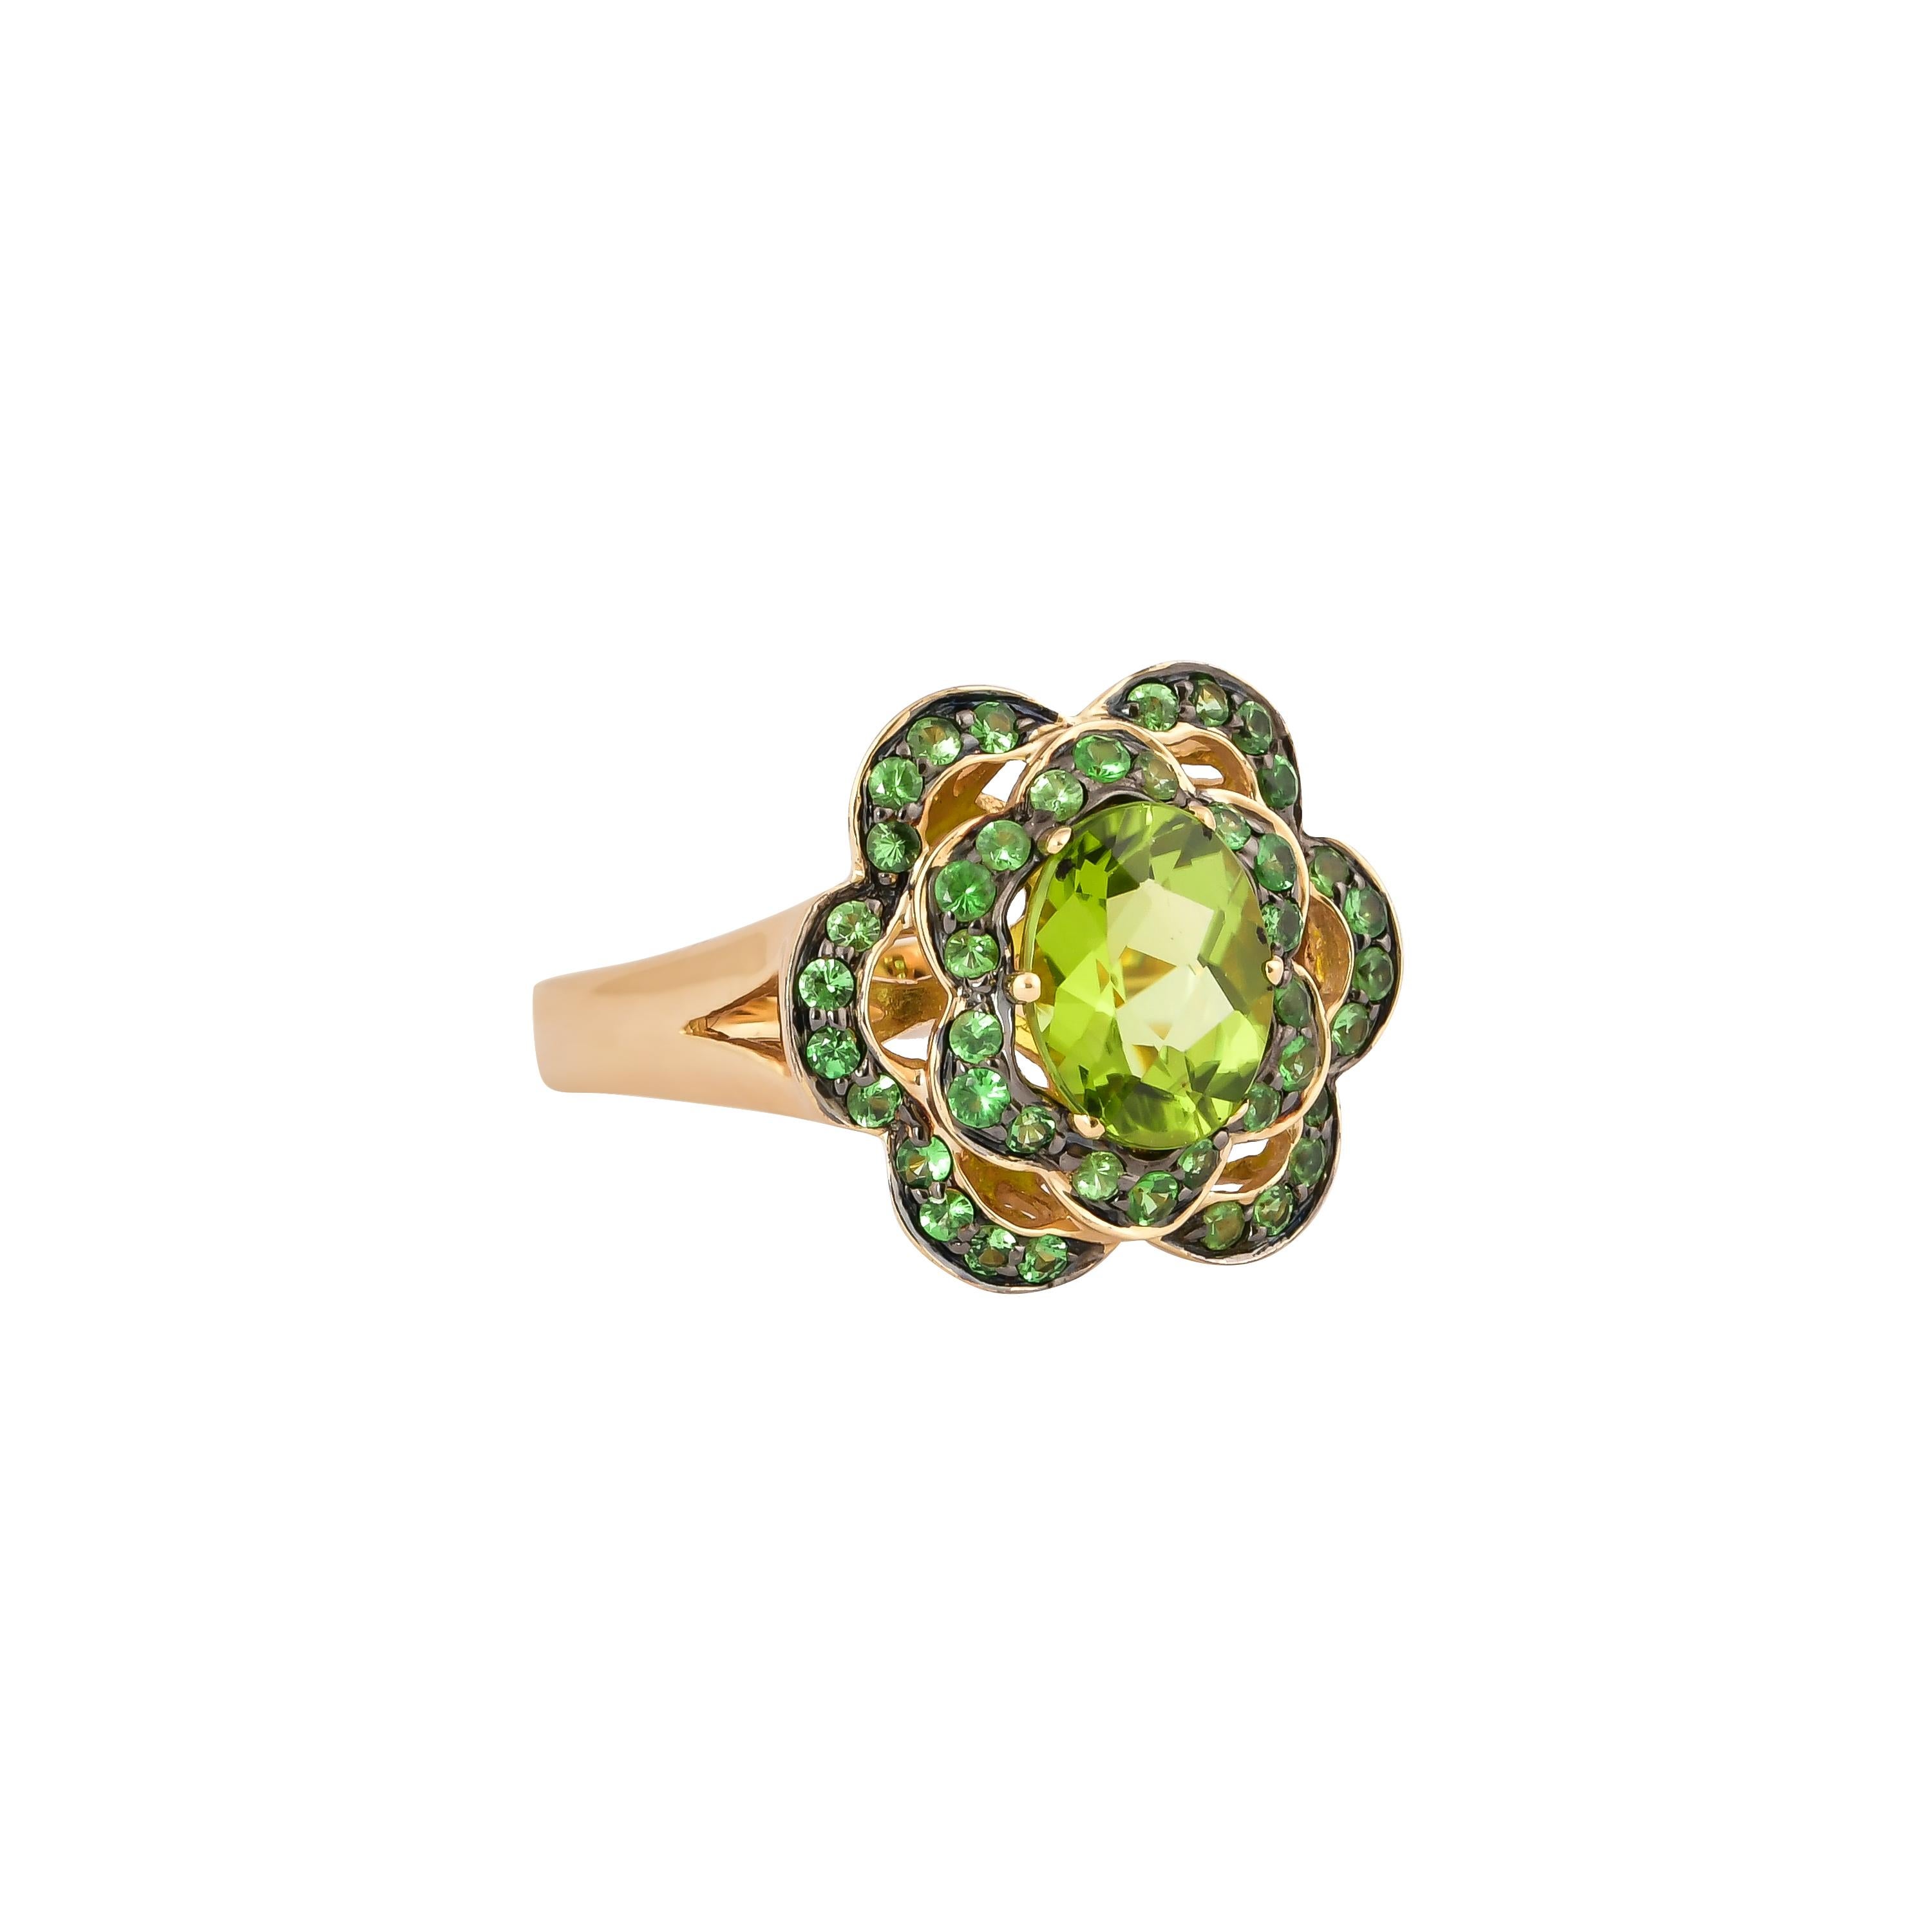 Glamorous Gemstones - Sunita Nahata started off her career as a gemstone trader, and this particular collection reflects her love for multi-colored semi-precious gemstones. This ring presents a cluster of the most precious peridots accented with